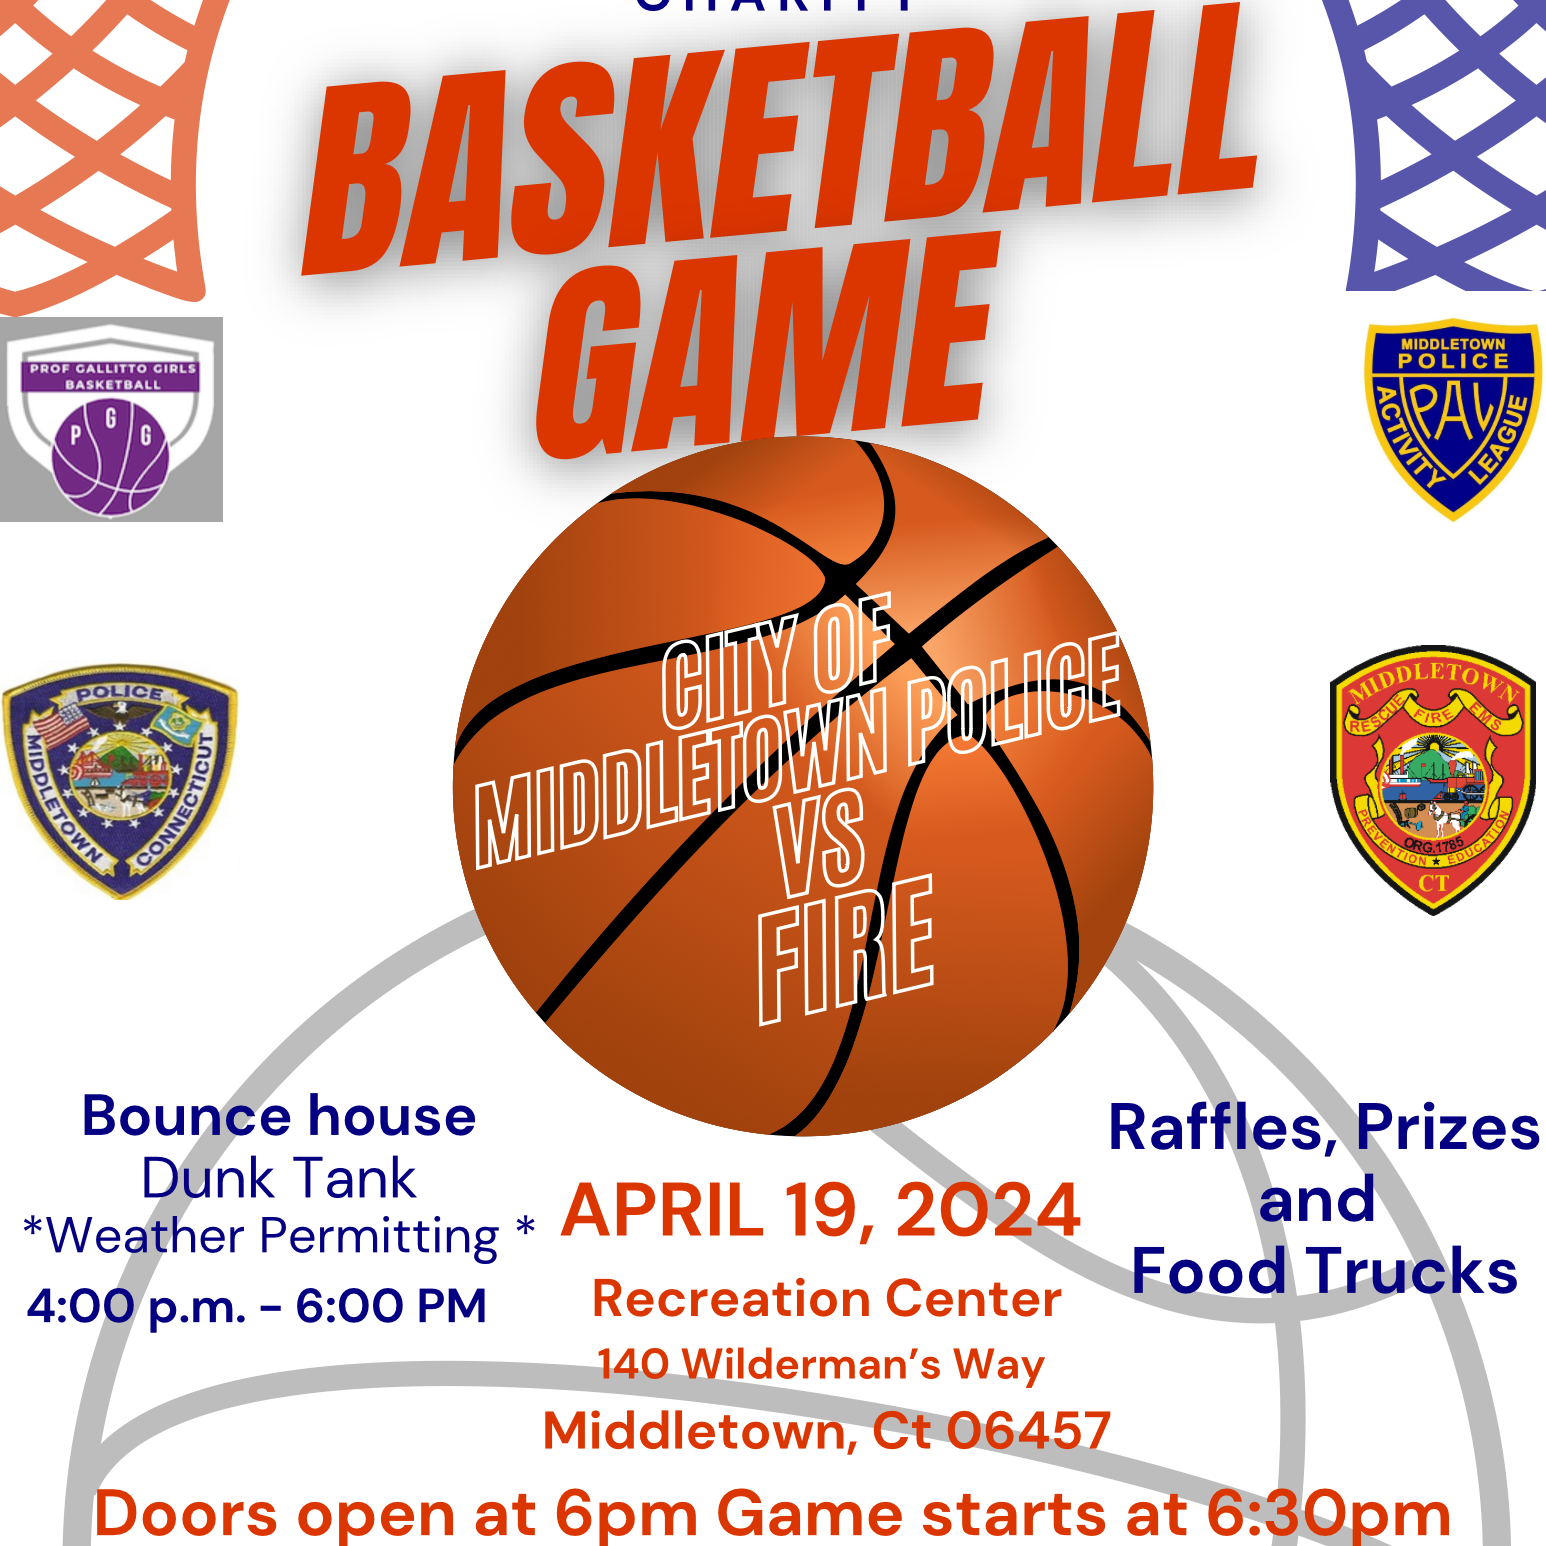 Prof Gallitto Basketball Charity April 19, 2024